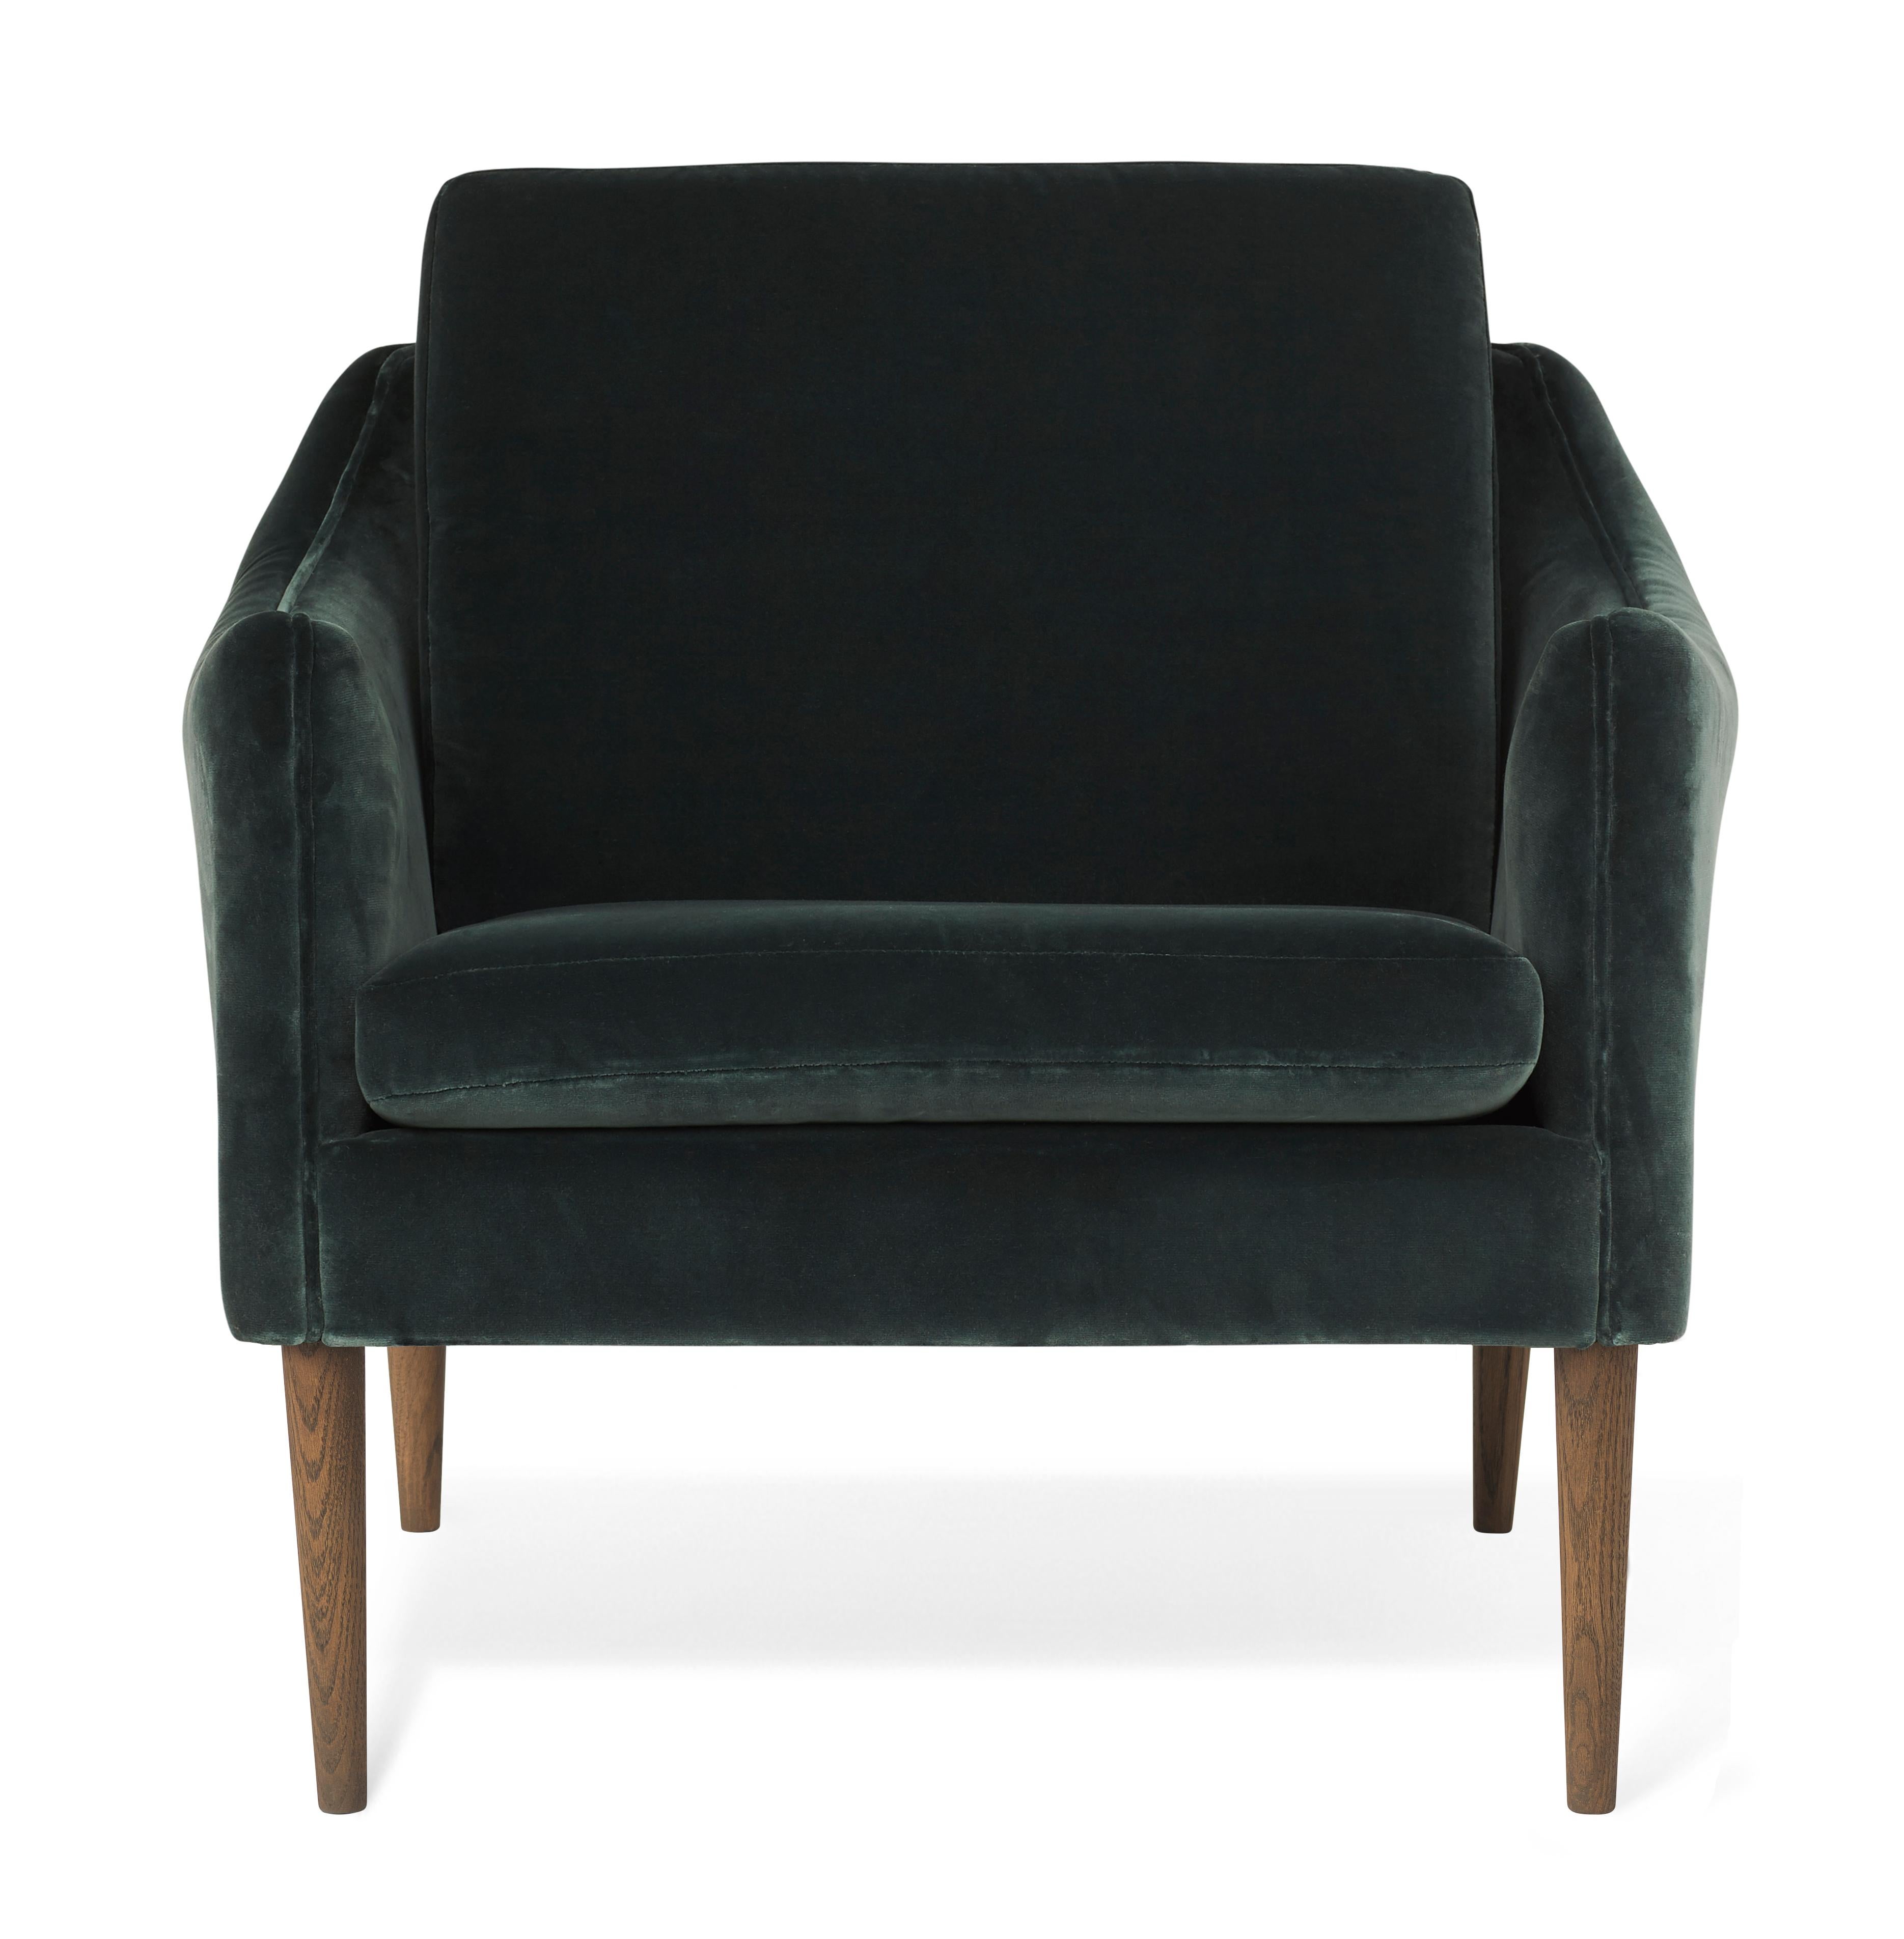 For Sale: Green (Ritz0705) Mr. Olsen Lounge Chair with Smoked Legs, by Hans Olsen from Warm Nordic